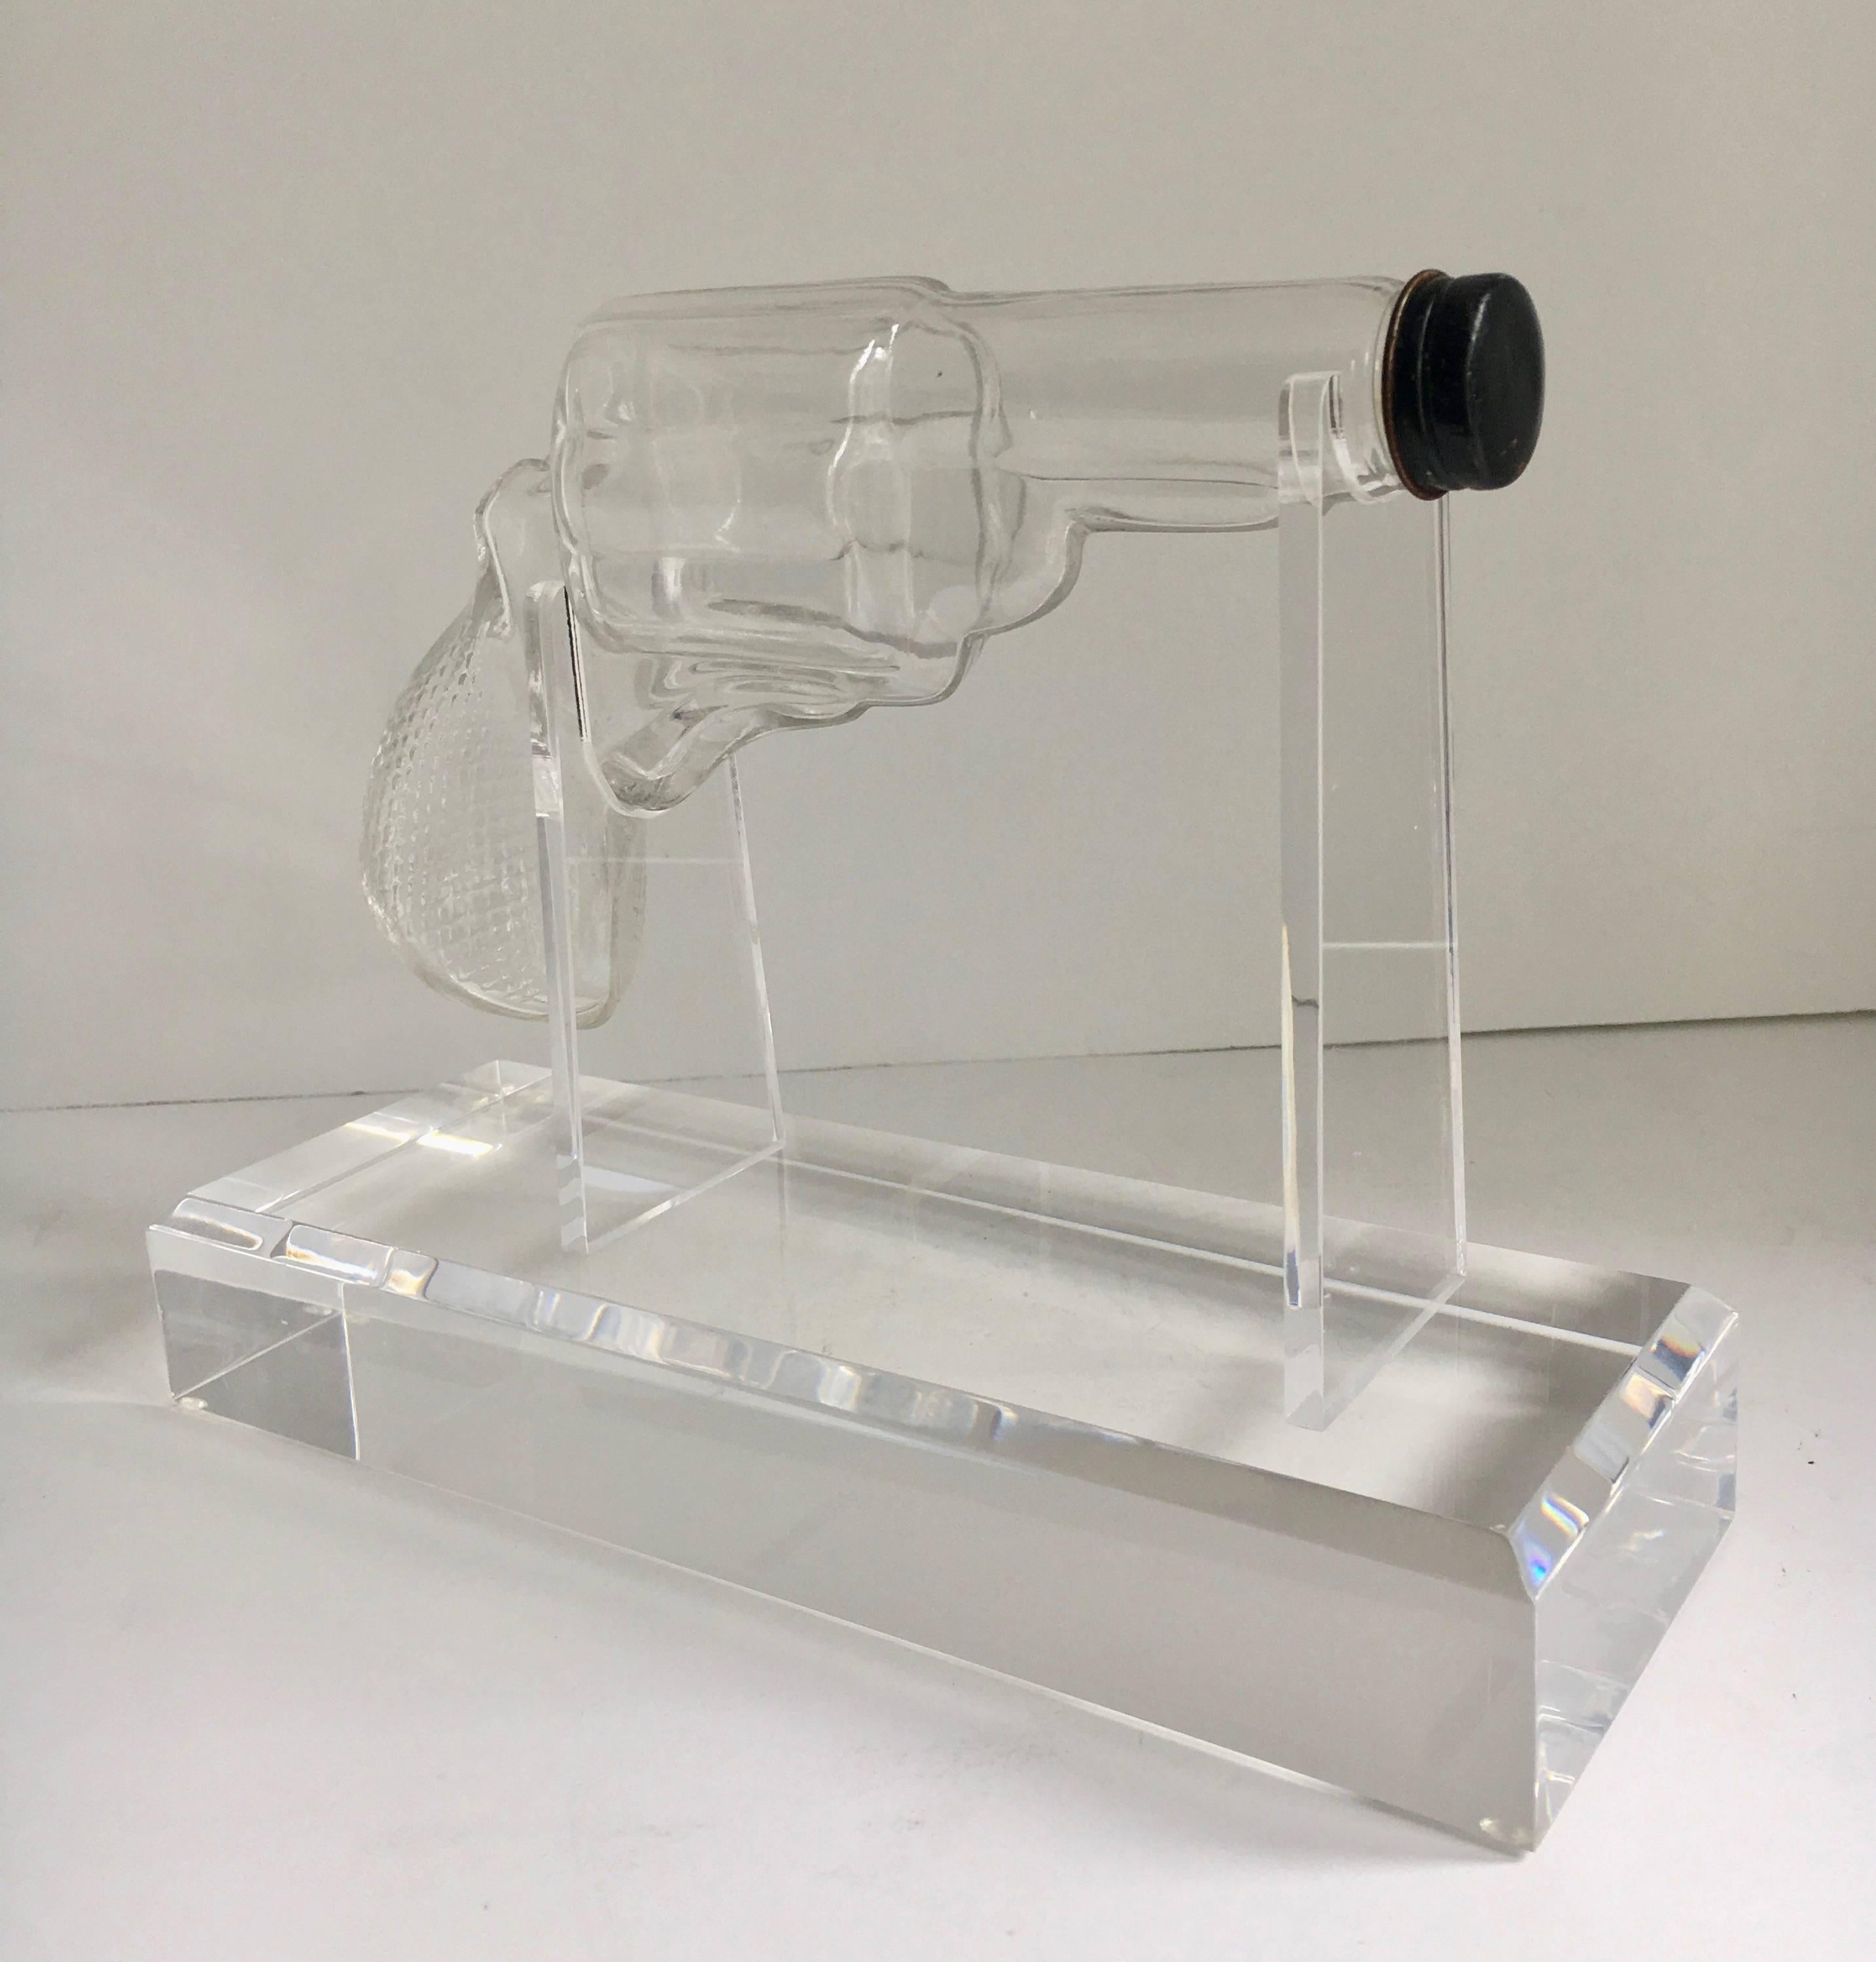 Glass gun on custom acrylic stand - a unique piece.. a vintage toy glass gun on custom acrylic stand... can be filled with anything from liquid to sprinkles!